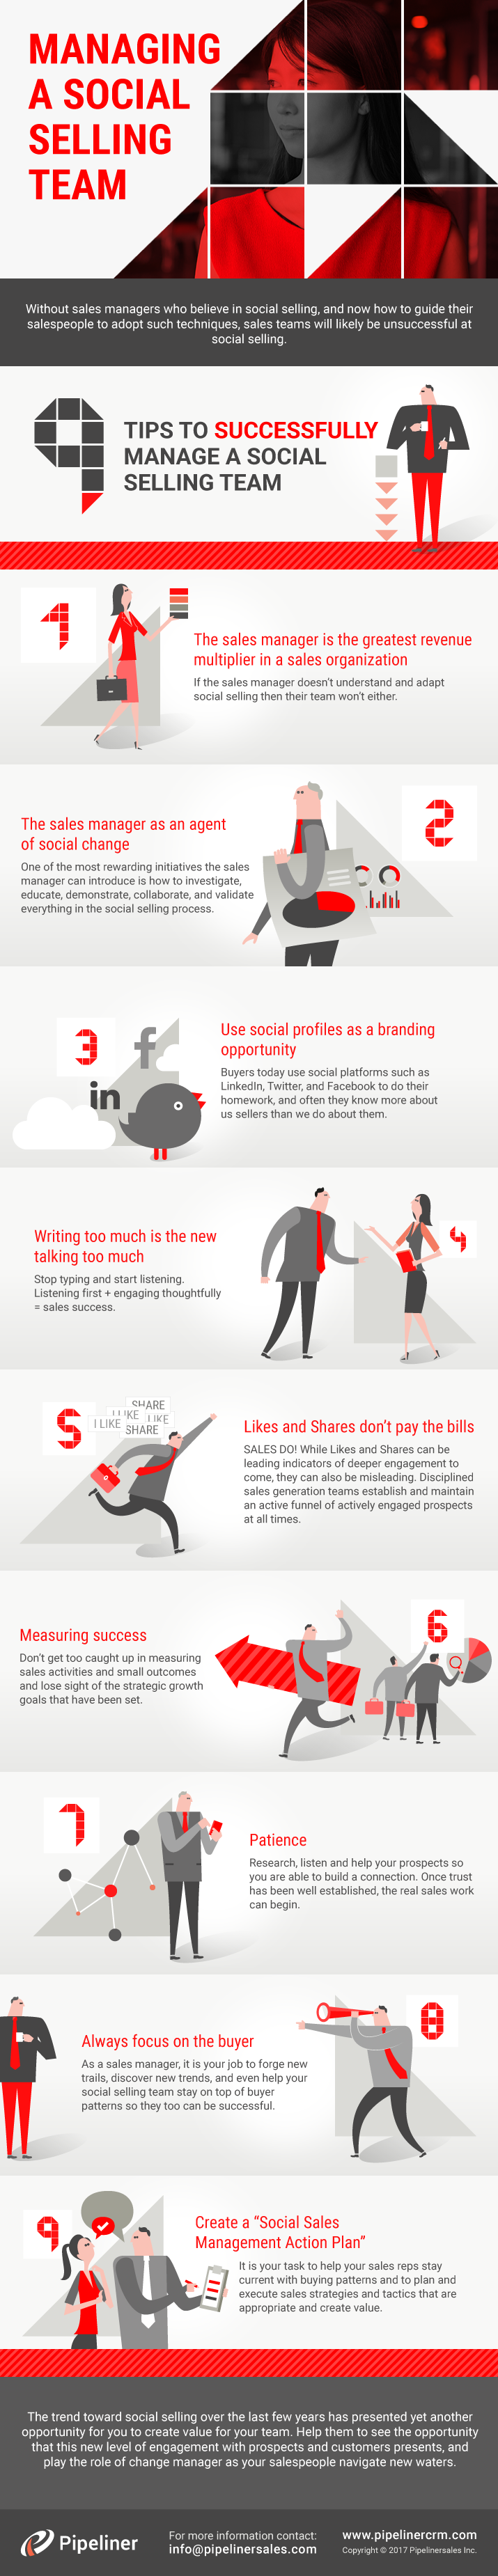 Managing a Social Selling Team - Infographic